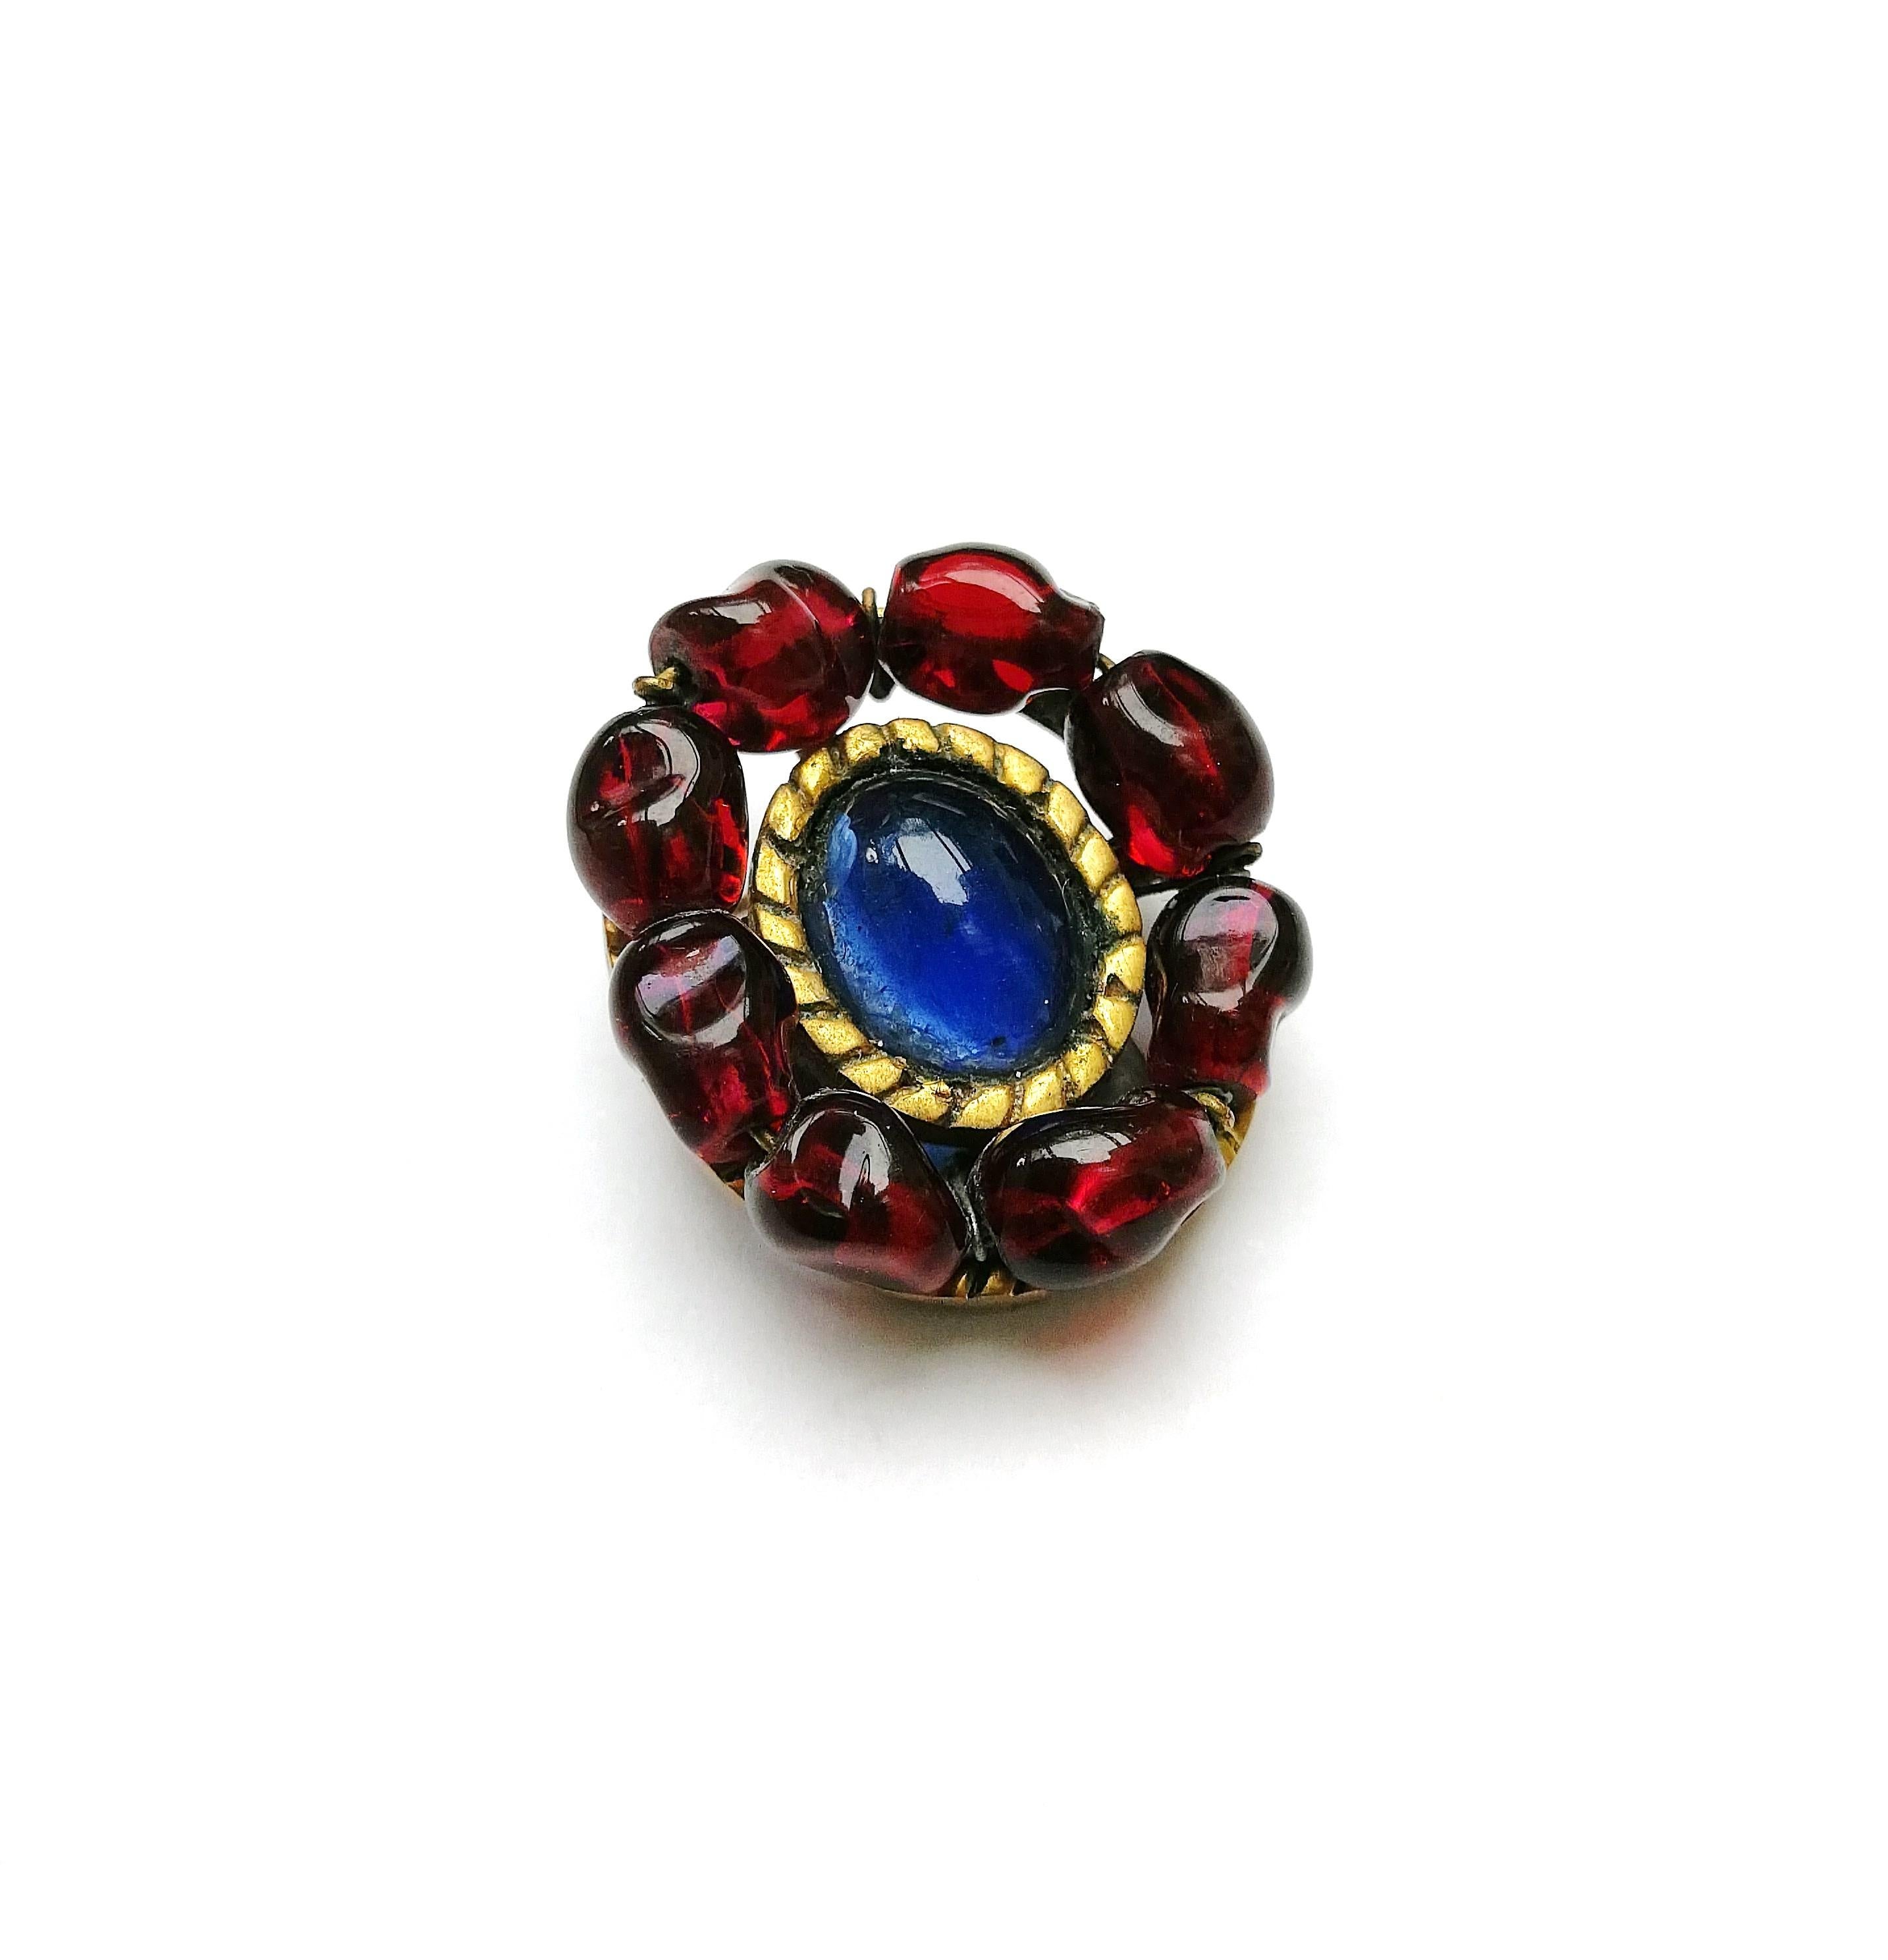 Ruby and sapphire poured glass earrings, att. Maison Gripoix for Chanel, 1930s. 2